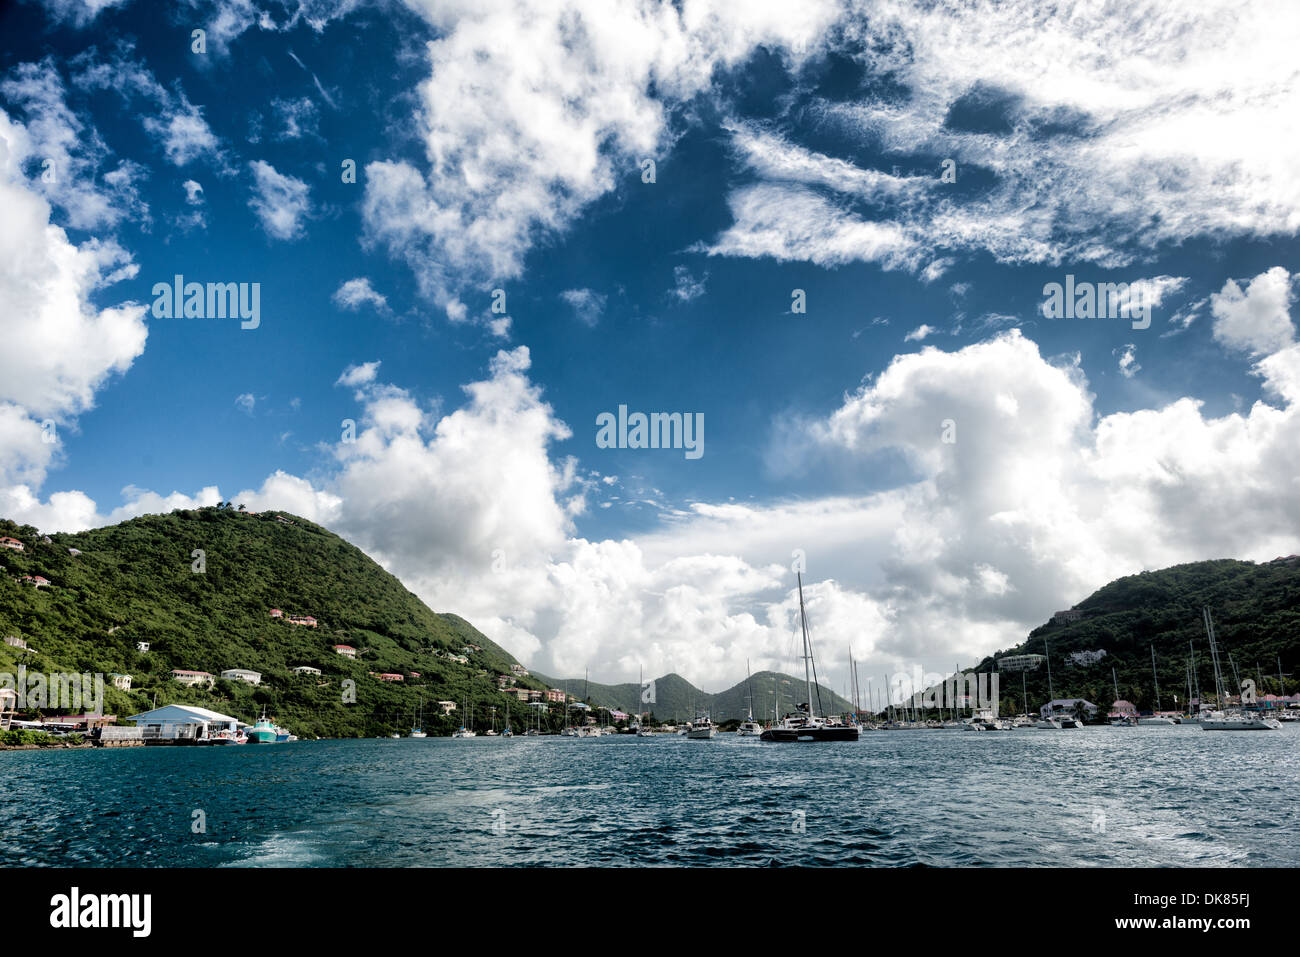 The habour at West End on Tortola in the British Virgin Islands, with Tortola on the left and Frenchman's Cay on the right. Known for its diverse marine life and coral reefs, the Caribbean region boasts some of the world's most beautiful and well-preserved beachscapes. Stock Photo